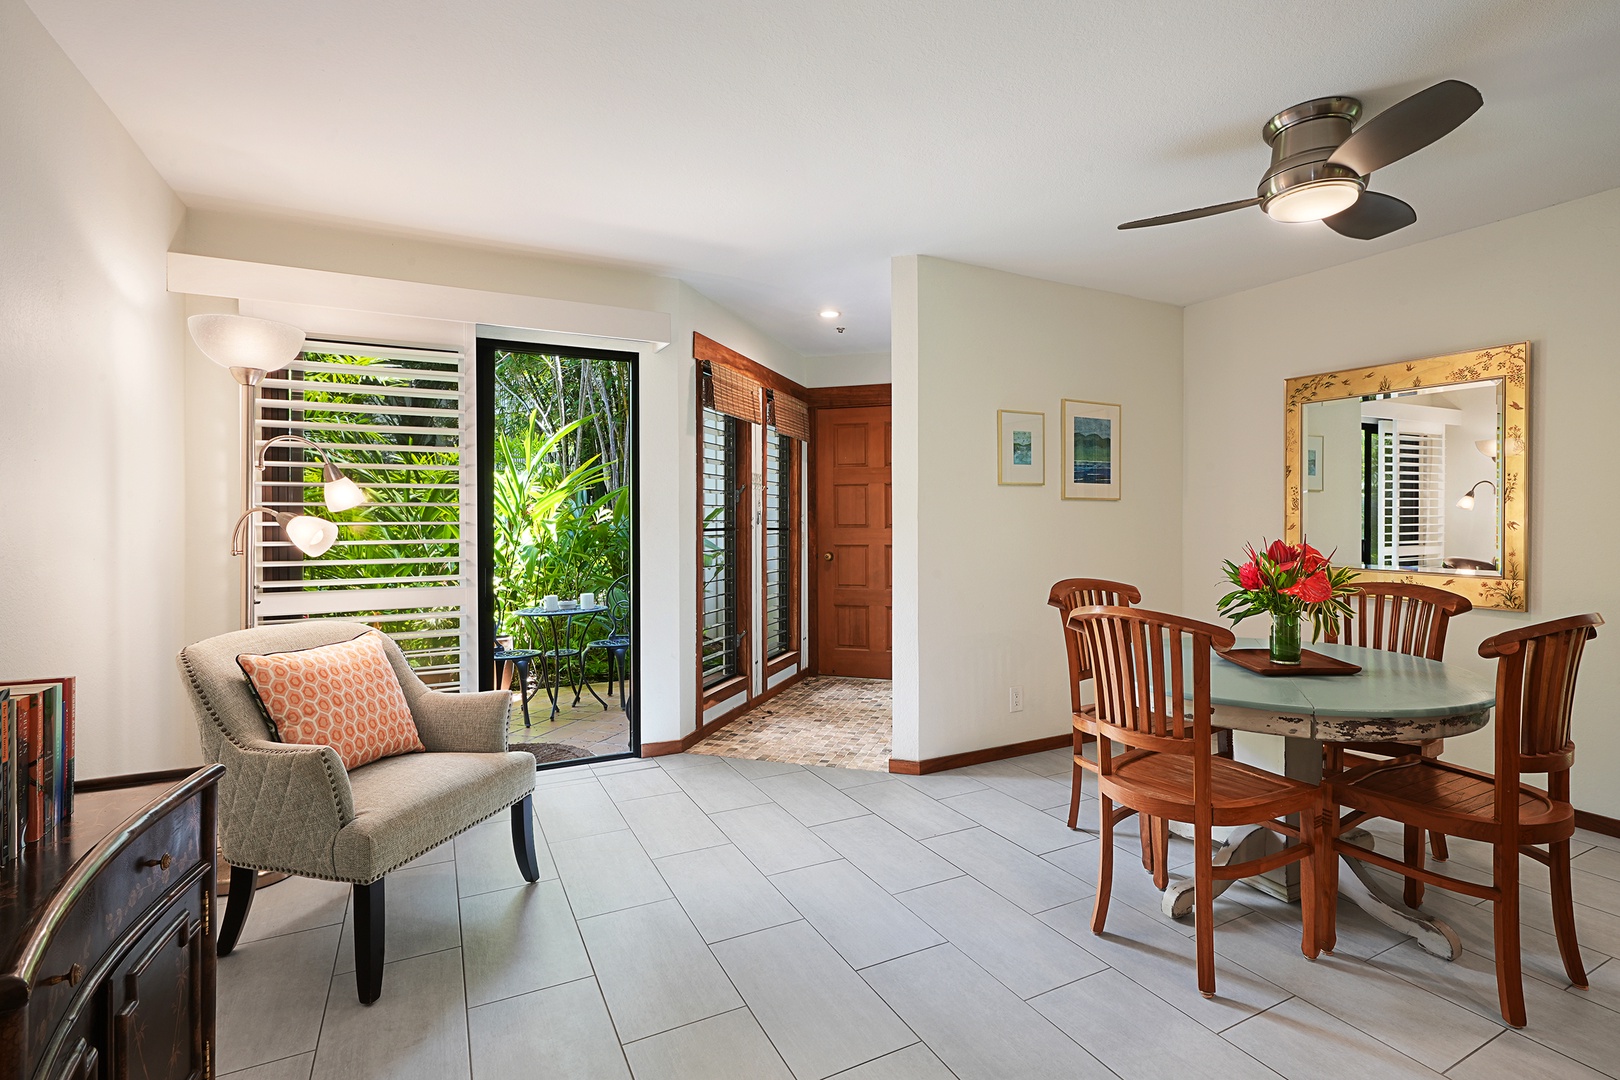 Koloa Vacation Rentals, Waikomo Streams 203 - Welcome and dine in style: an inviting entry seamlessly transitions into a stylish dining area.